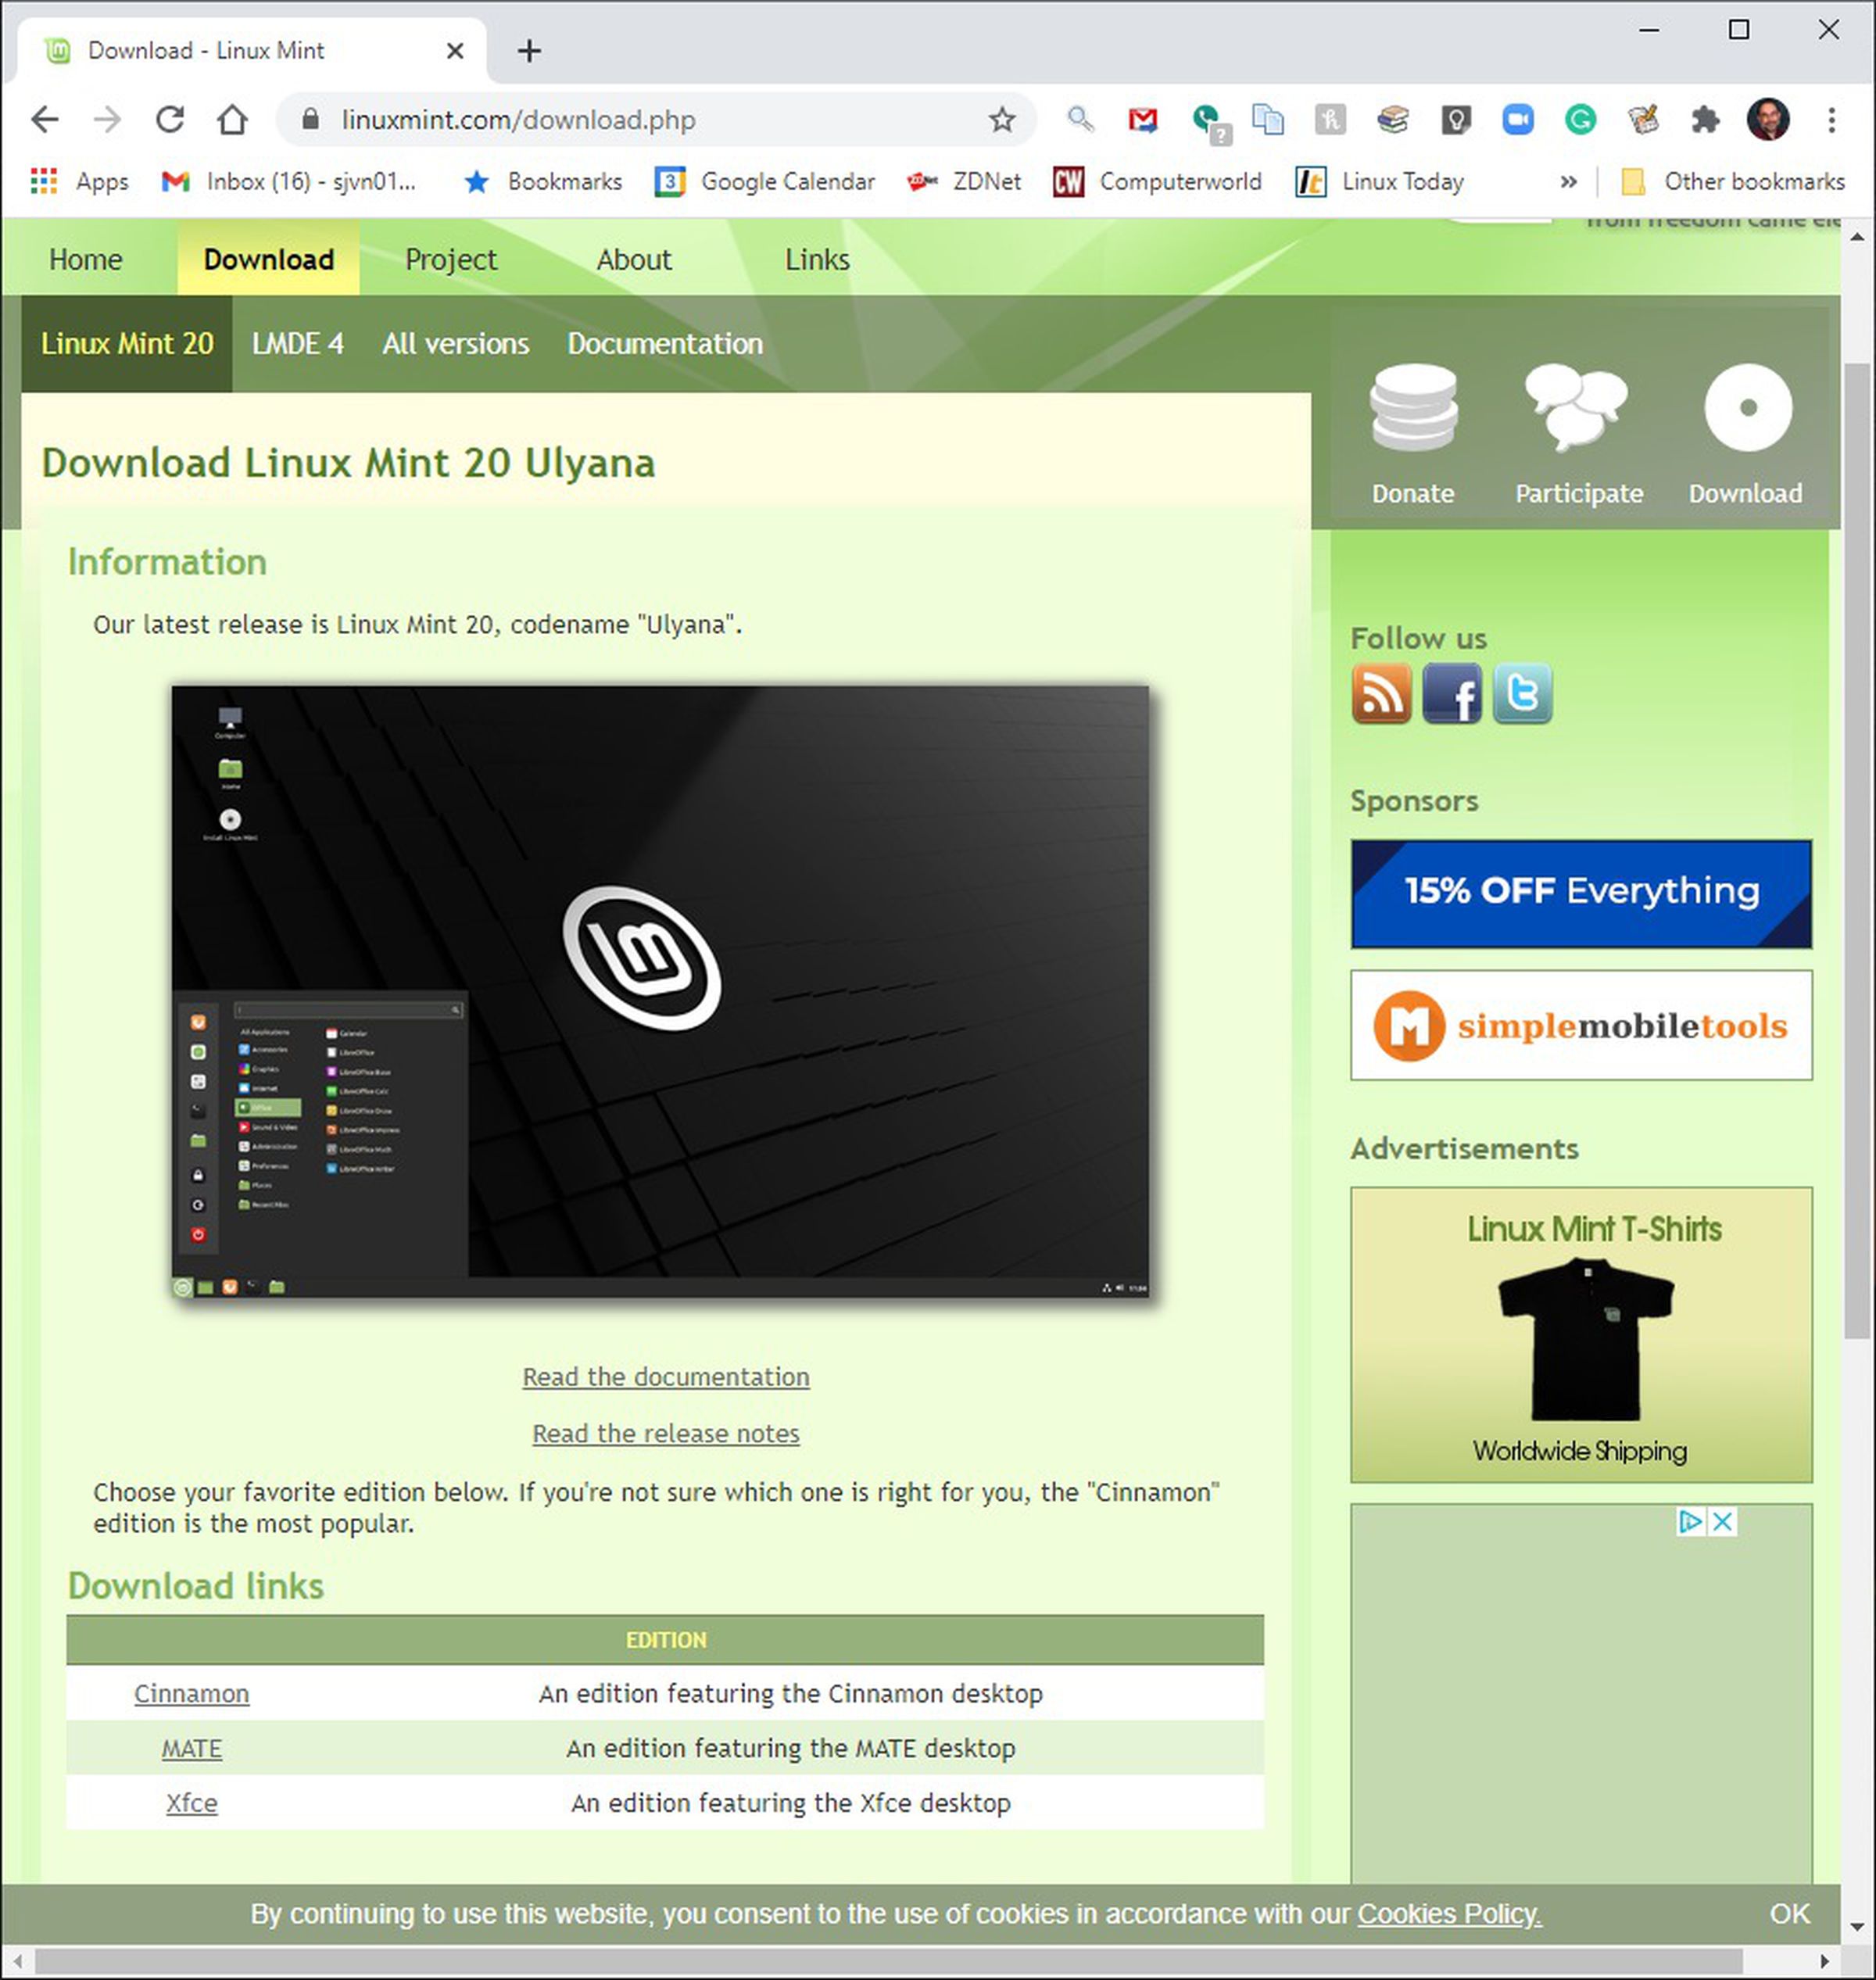 First, download Linux Mint.